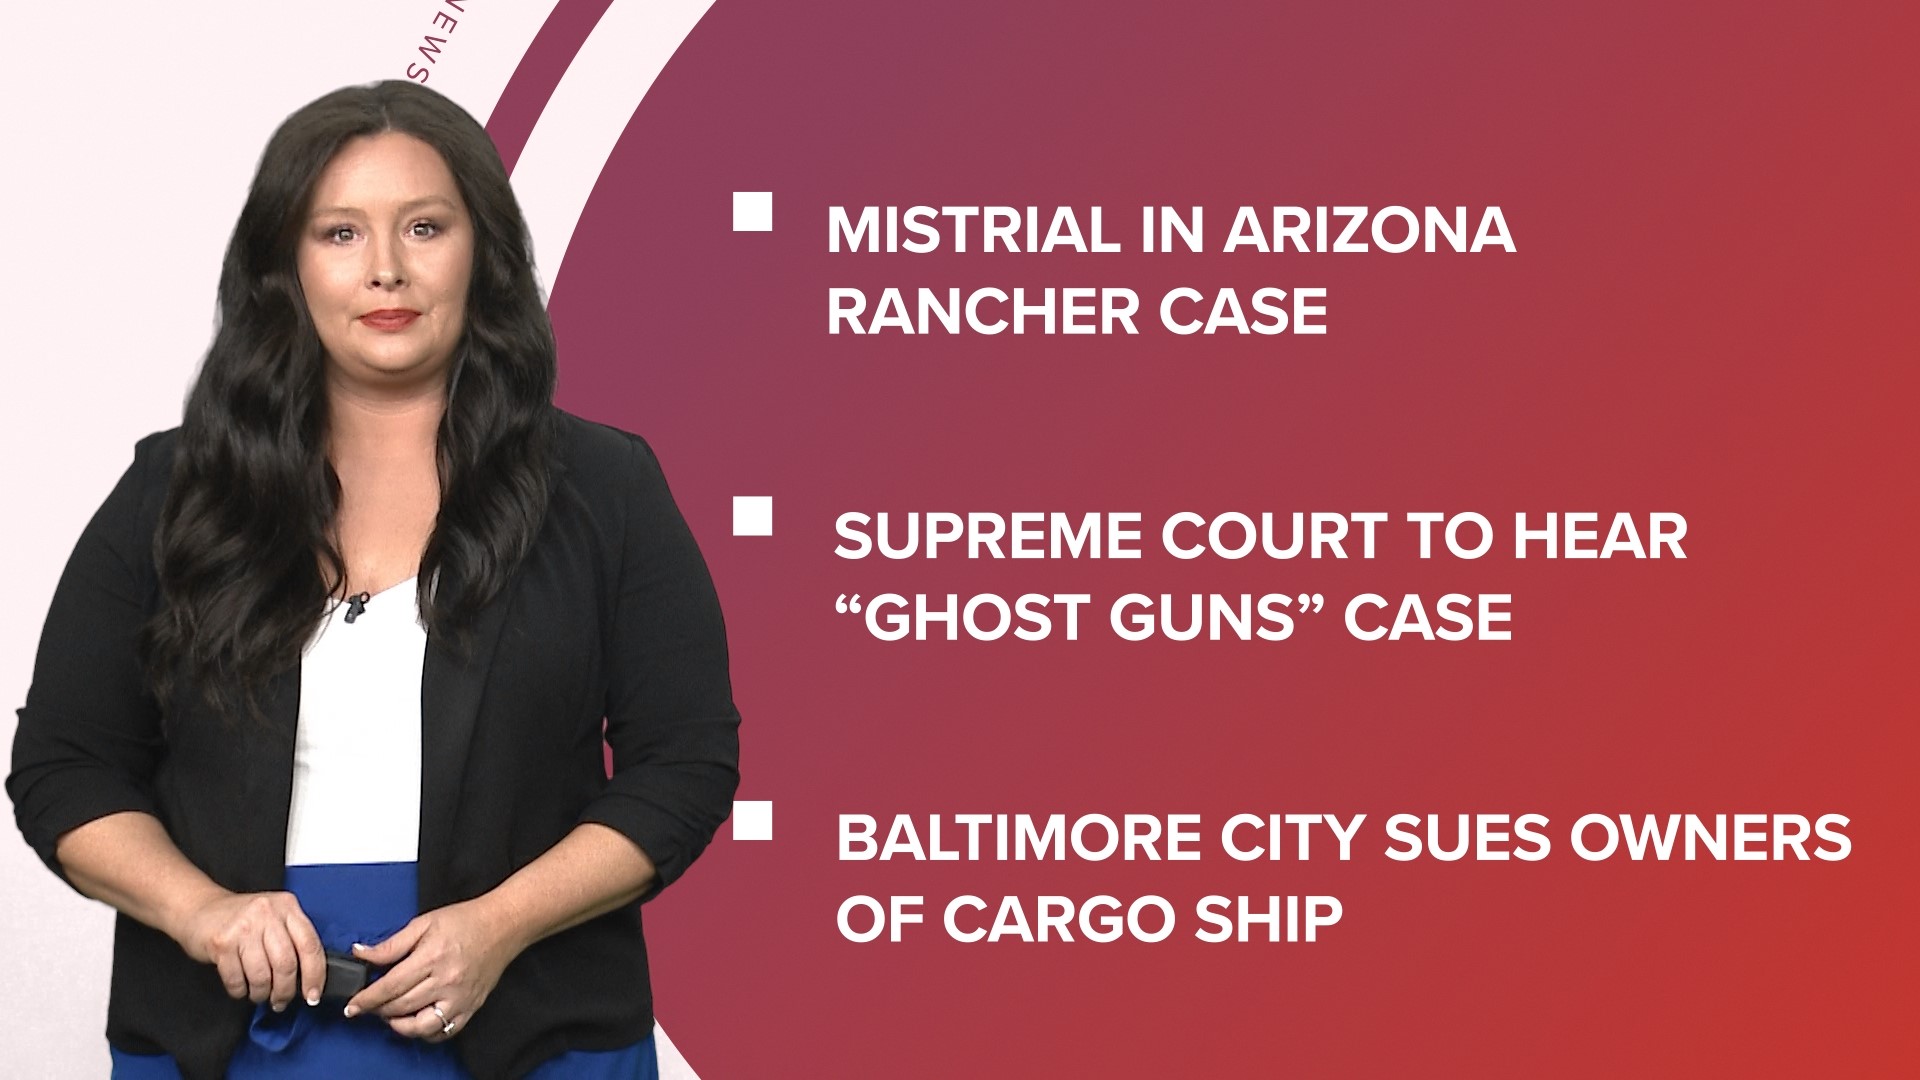 A look at what is happening in the news from Baltimore suing cargo ship company over bridge collapse to Supreme Court to hear ghost guns case and more.